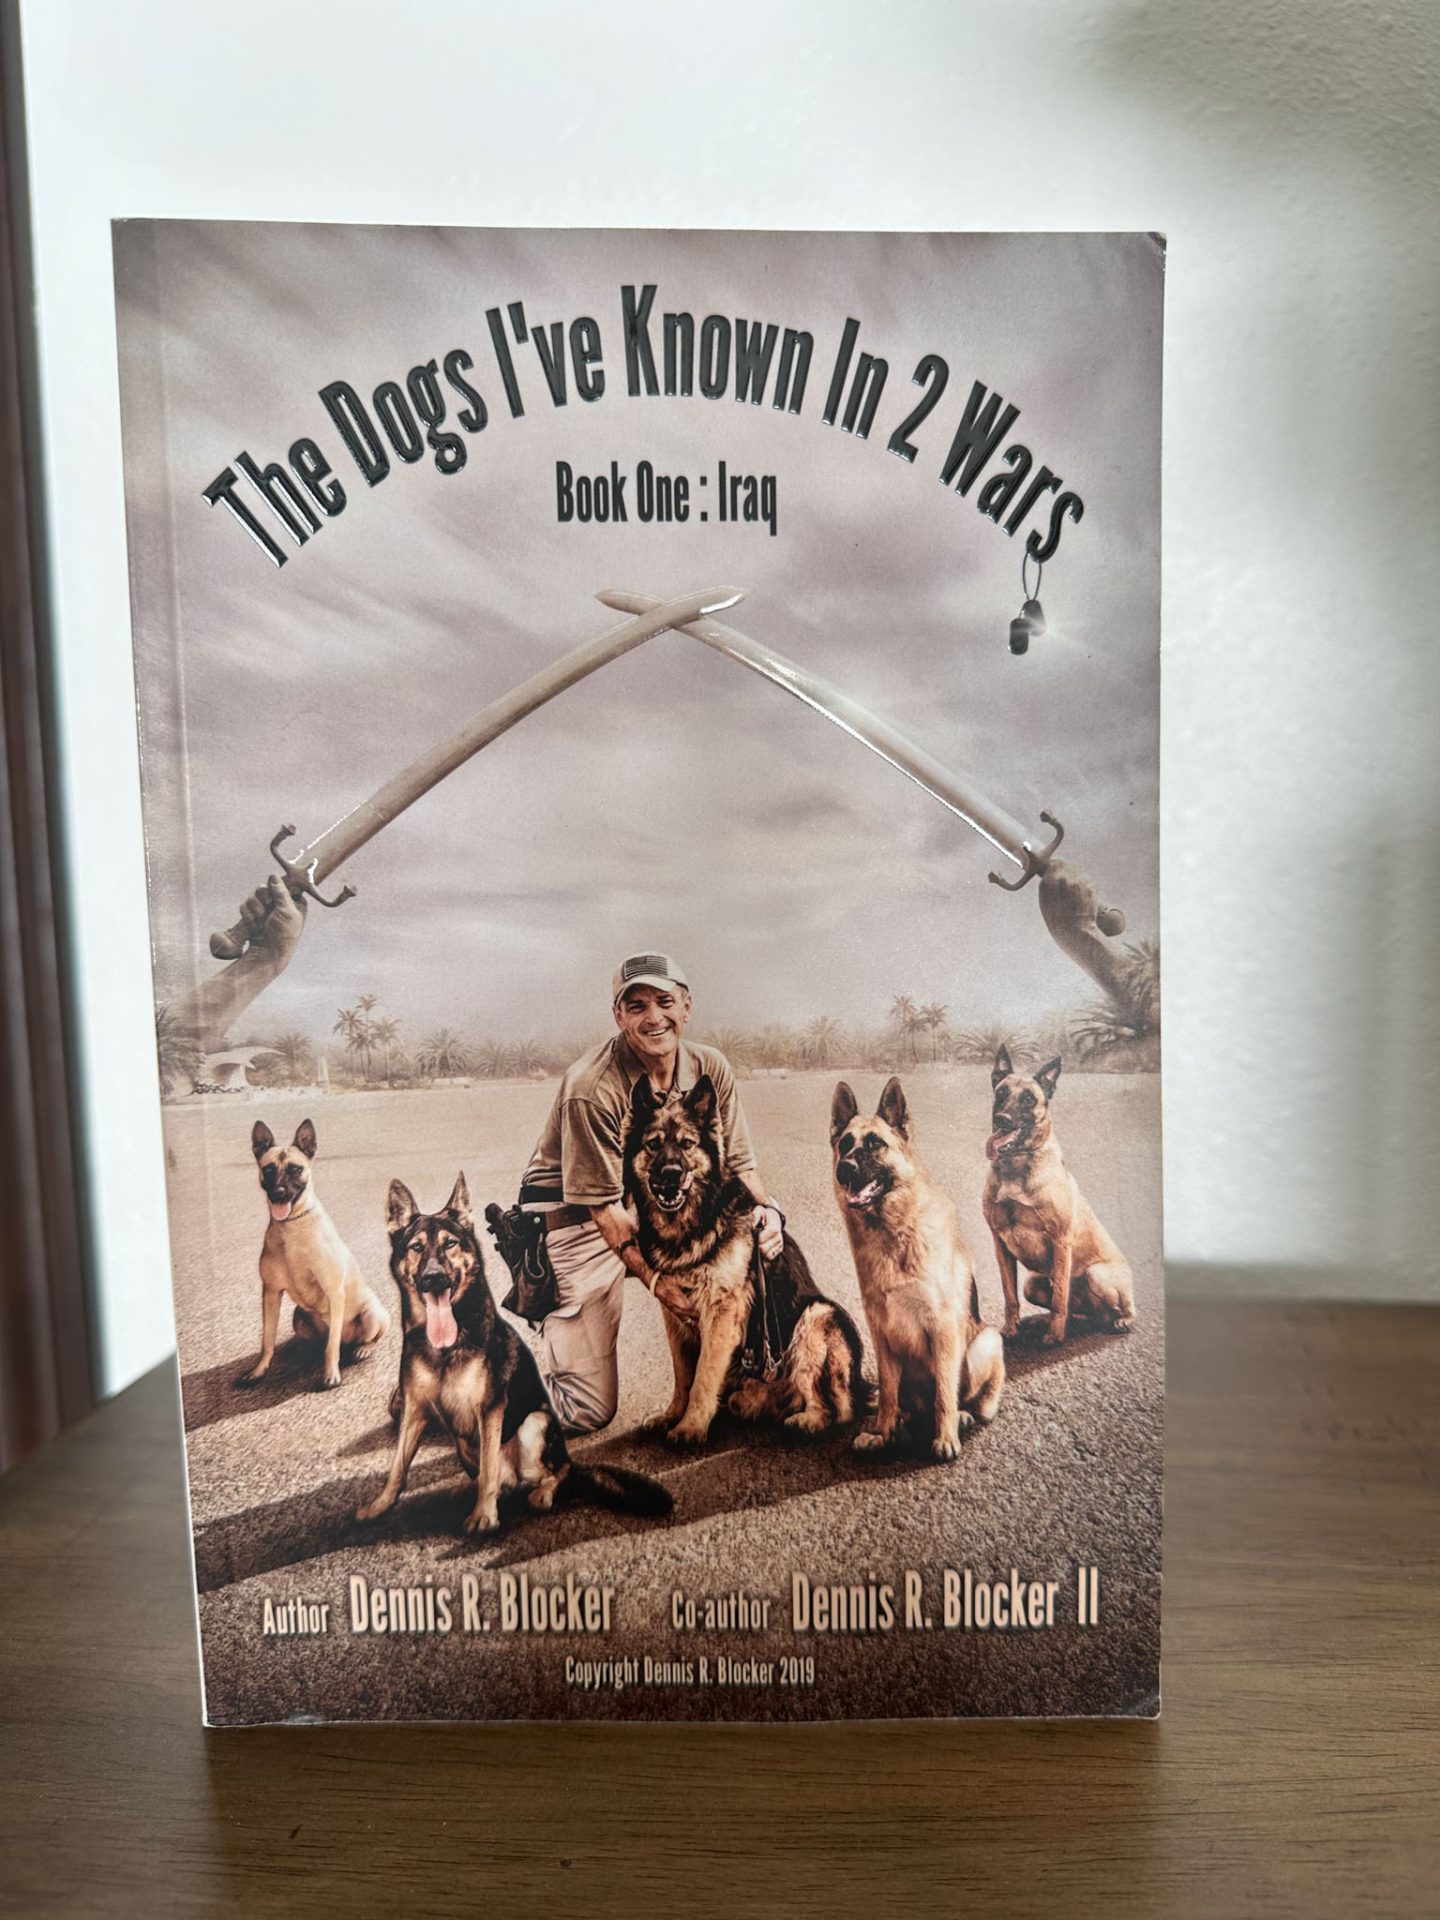 The Dogs I've Known in 2 Wars book